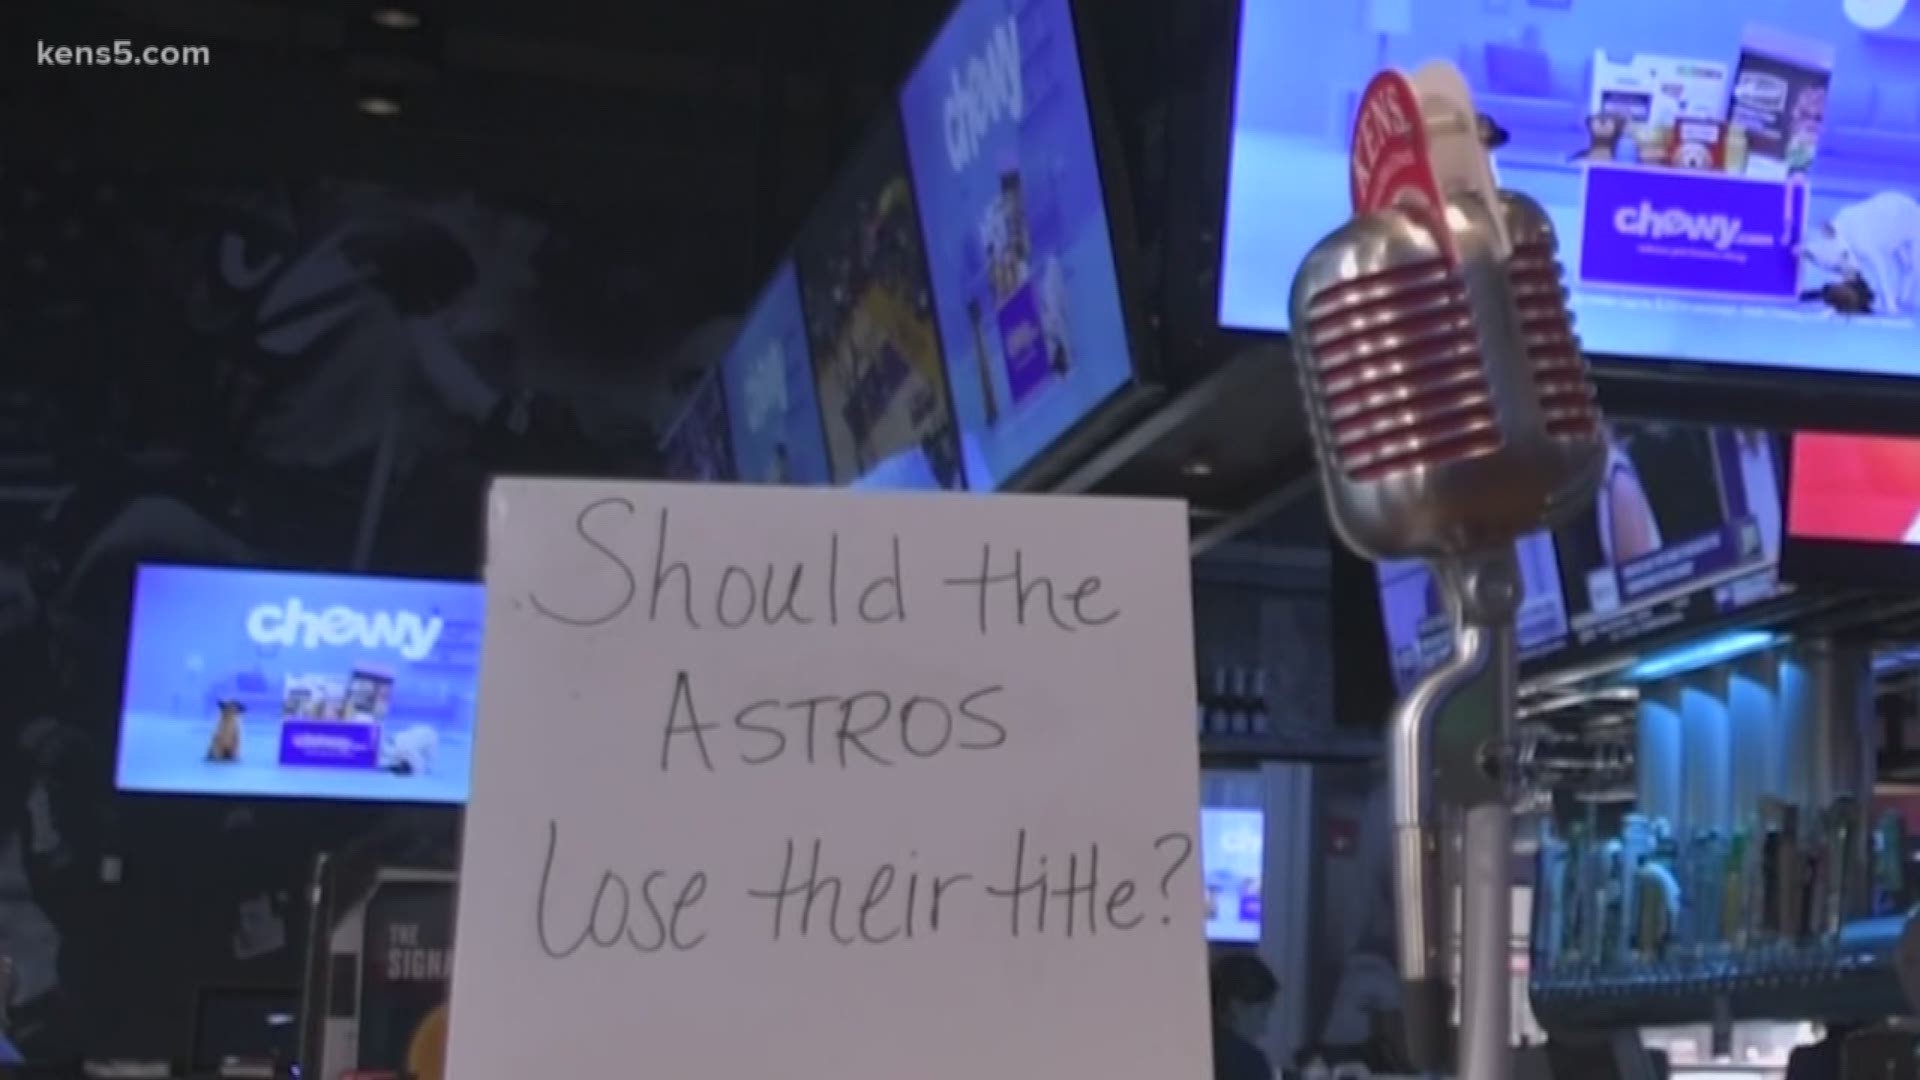 In the aftermath of the MLB determining the Houston Astros cheated during their 2017 championship run, we asked: Should the victory be negated?